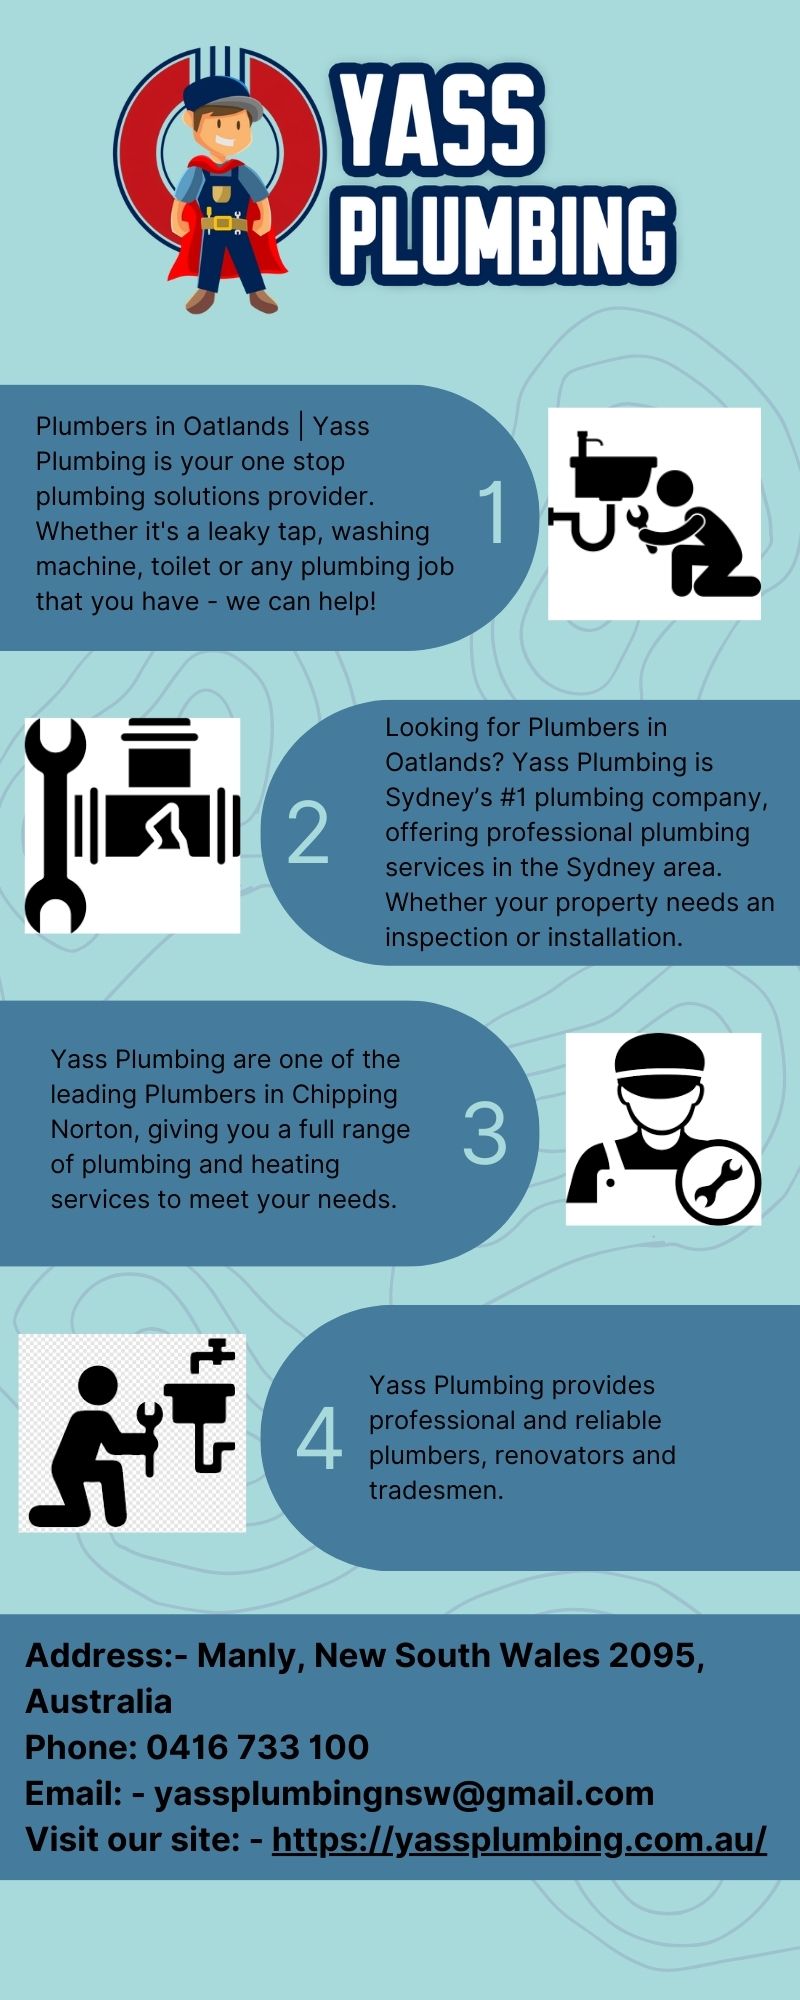 Looking for an emergency plumber in Sydney?